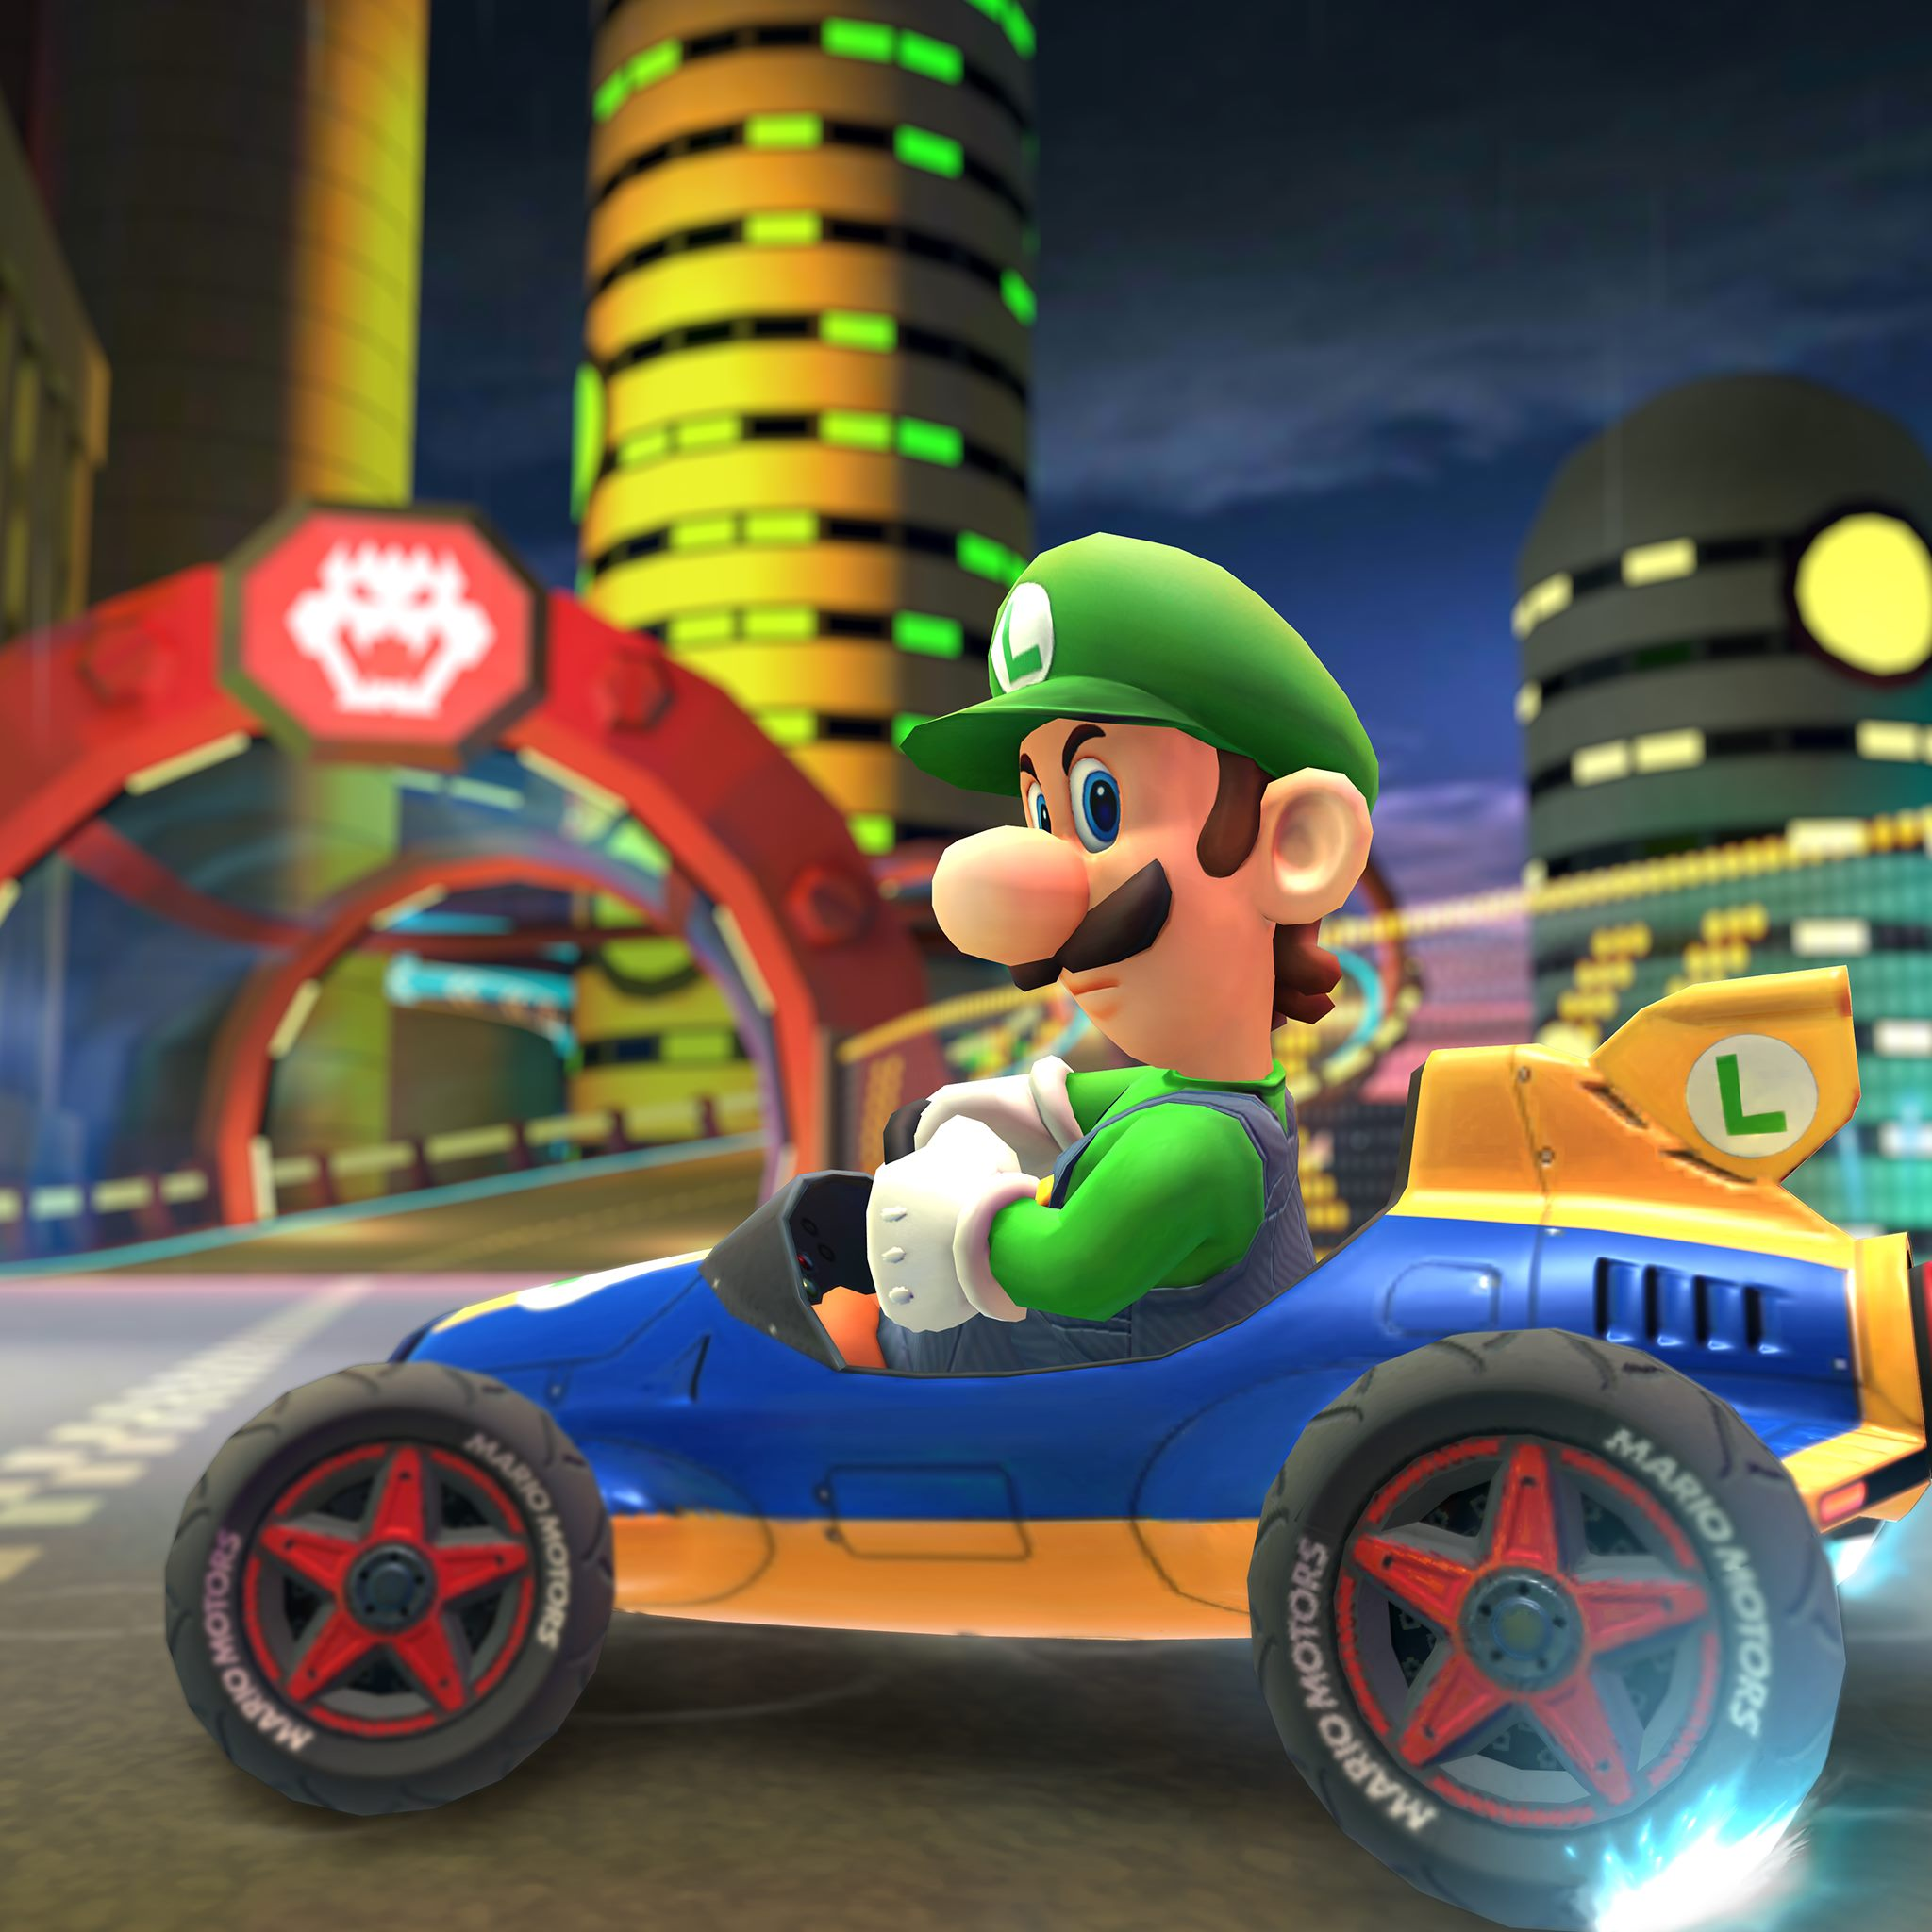 Mario Kart 8 and all of its DLC courses are $20 off